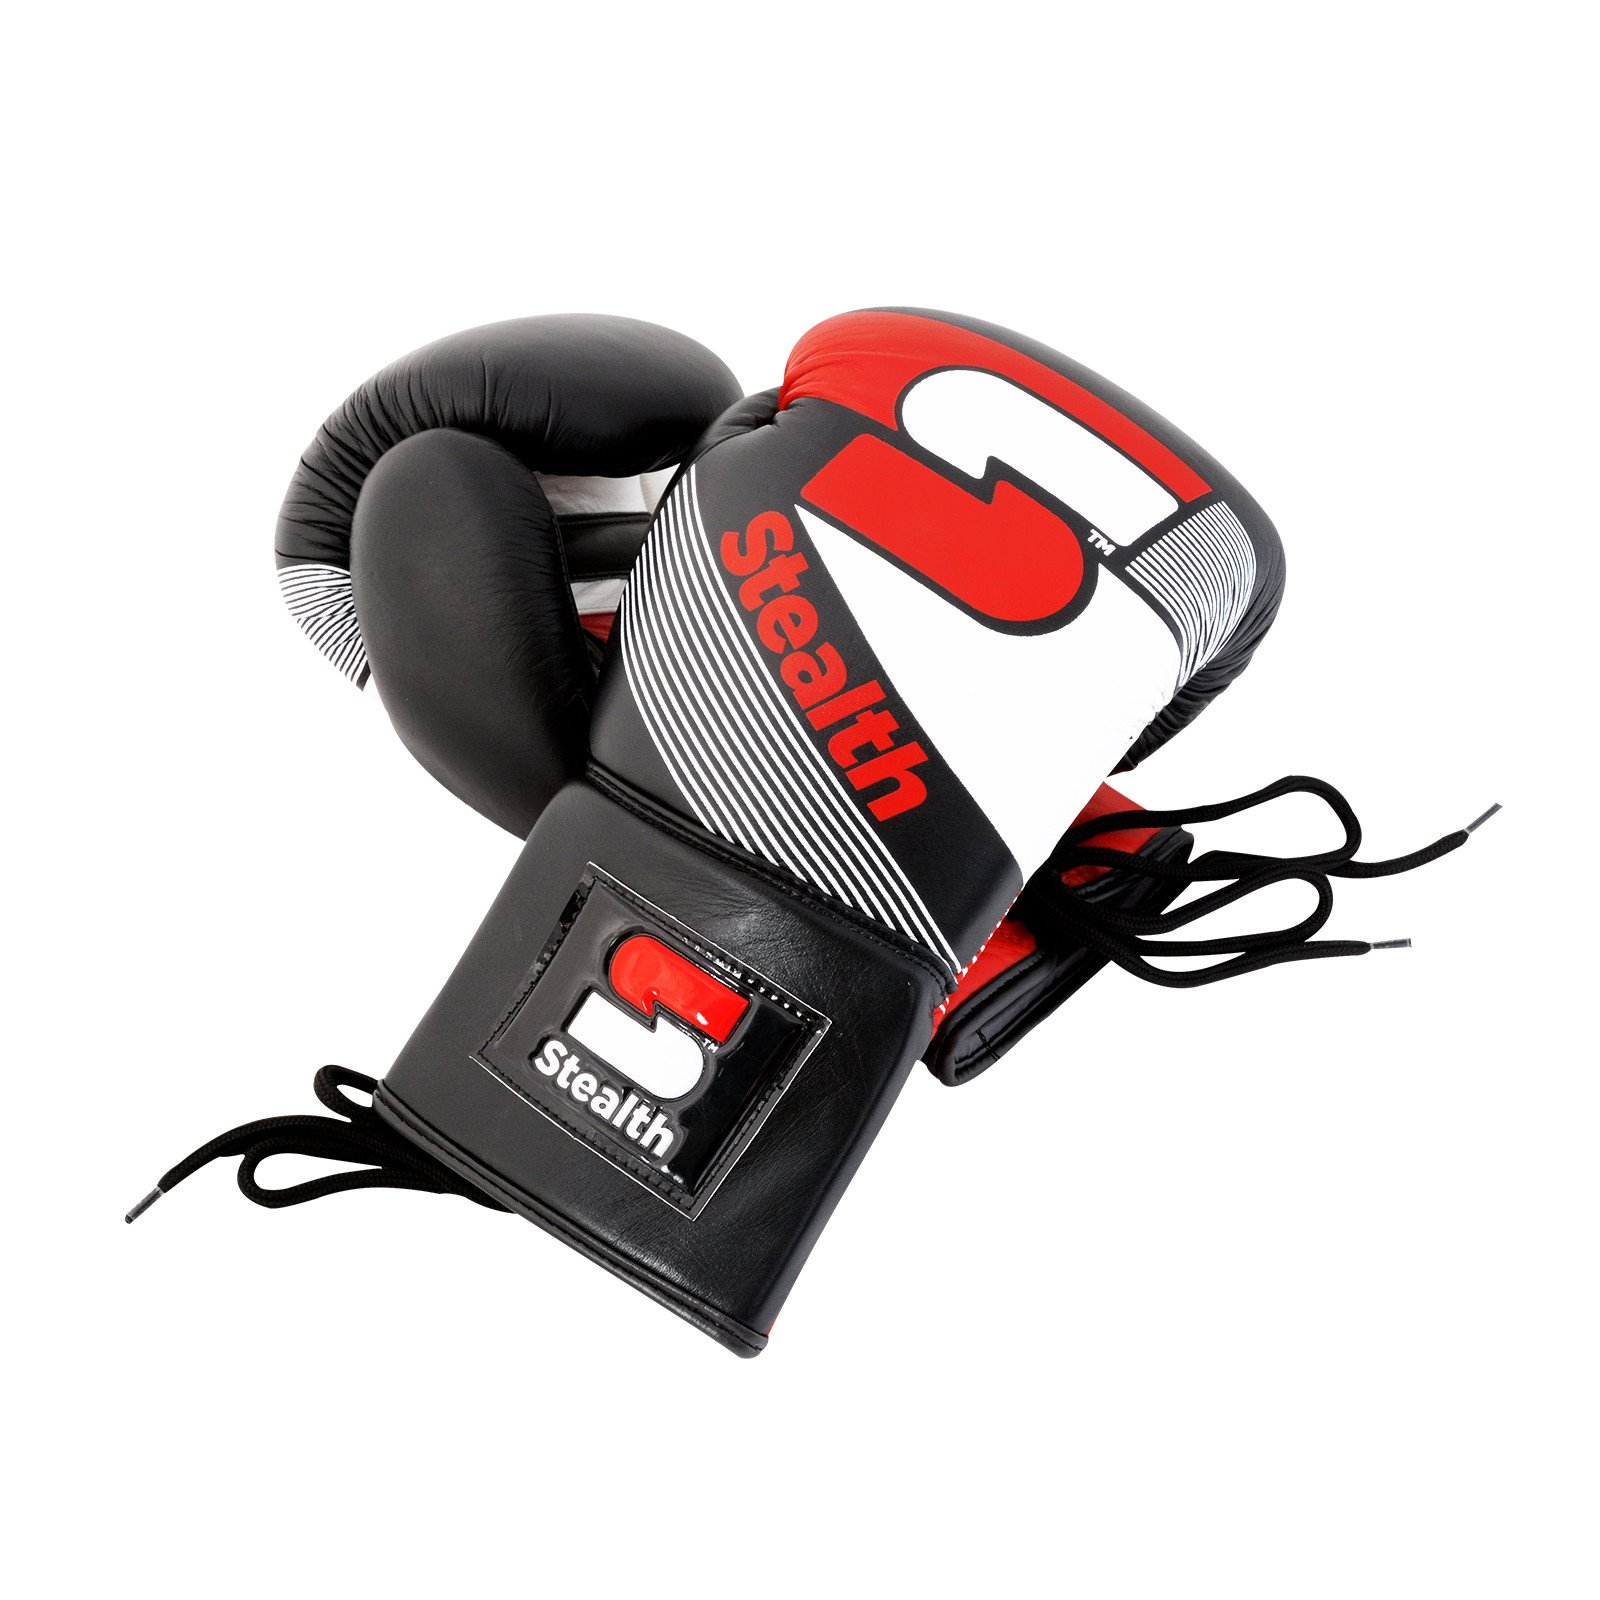 Why should buy Boxing Gloves from Stealth Sports?